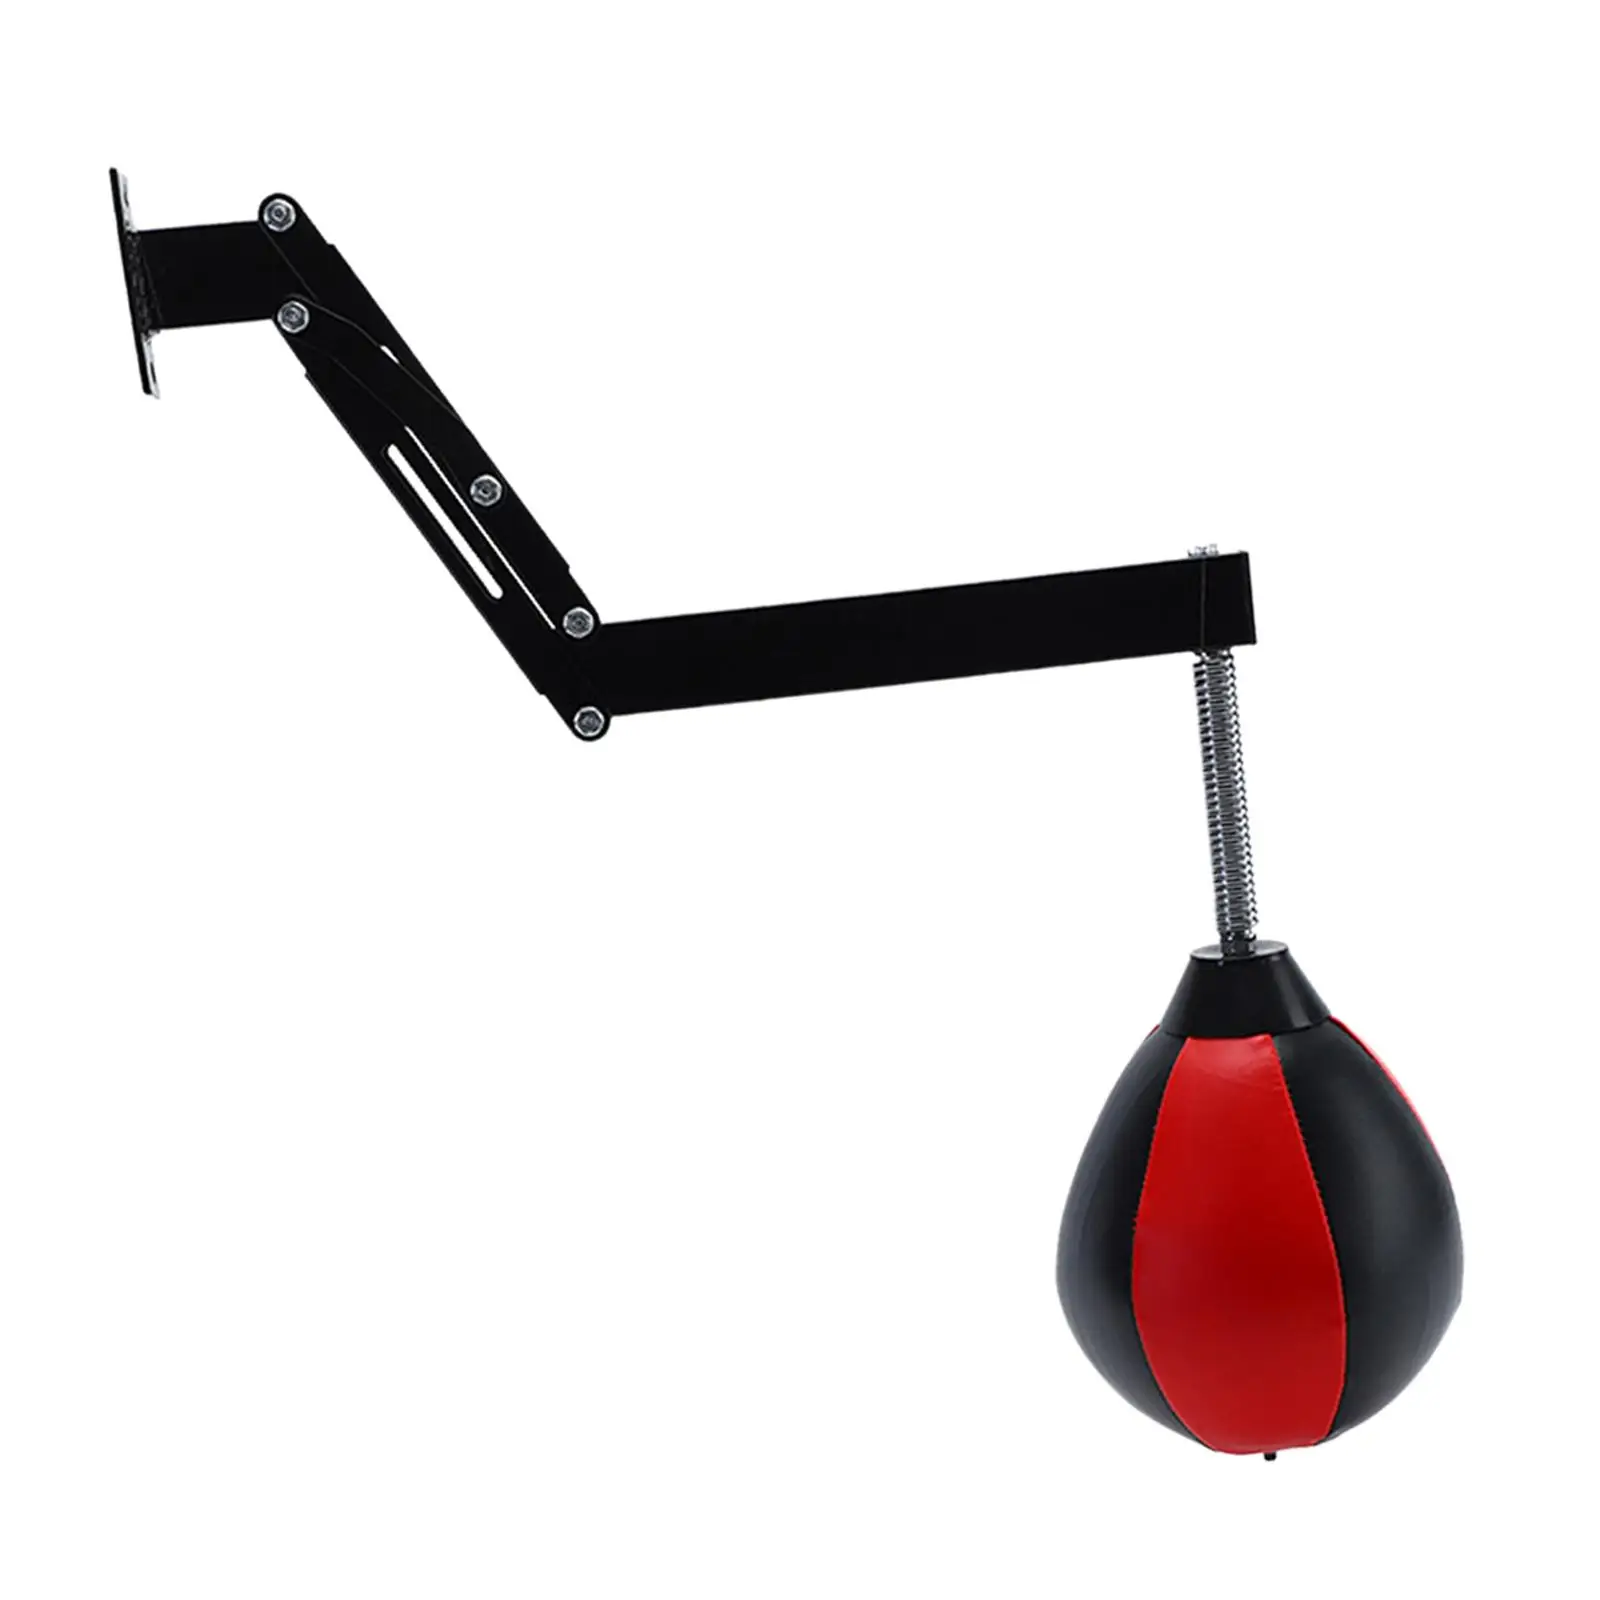 Speed Bag Height Adjustable Heavy Duty Inflatable Wall Mount Boxing Punching Bag for Fitness Sparring Training